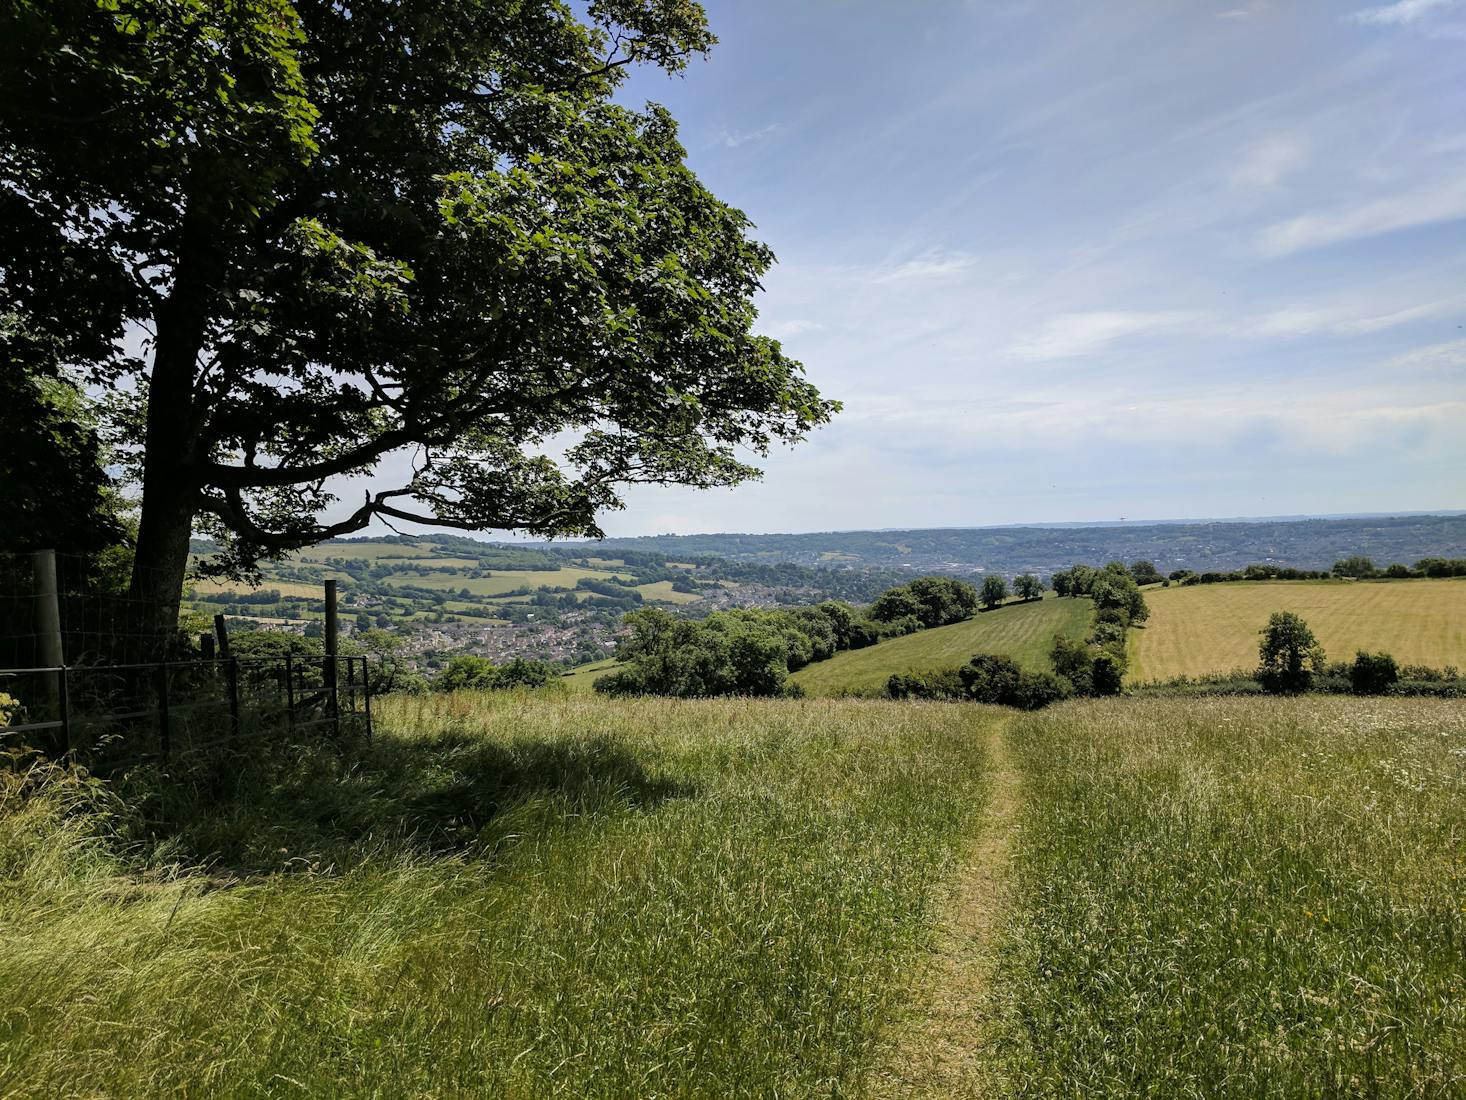 Best hikes in Bath